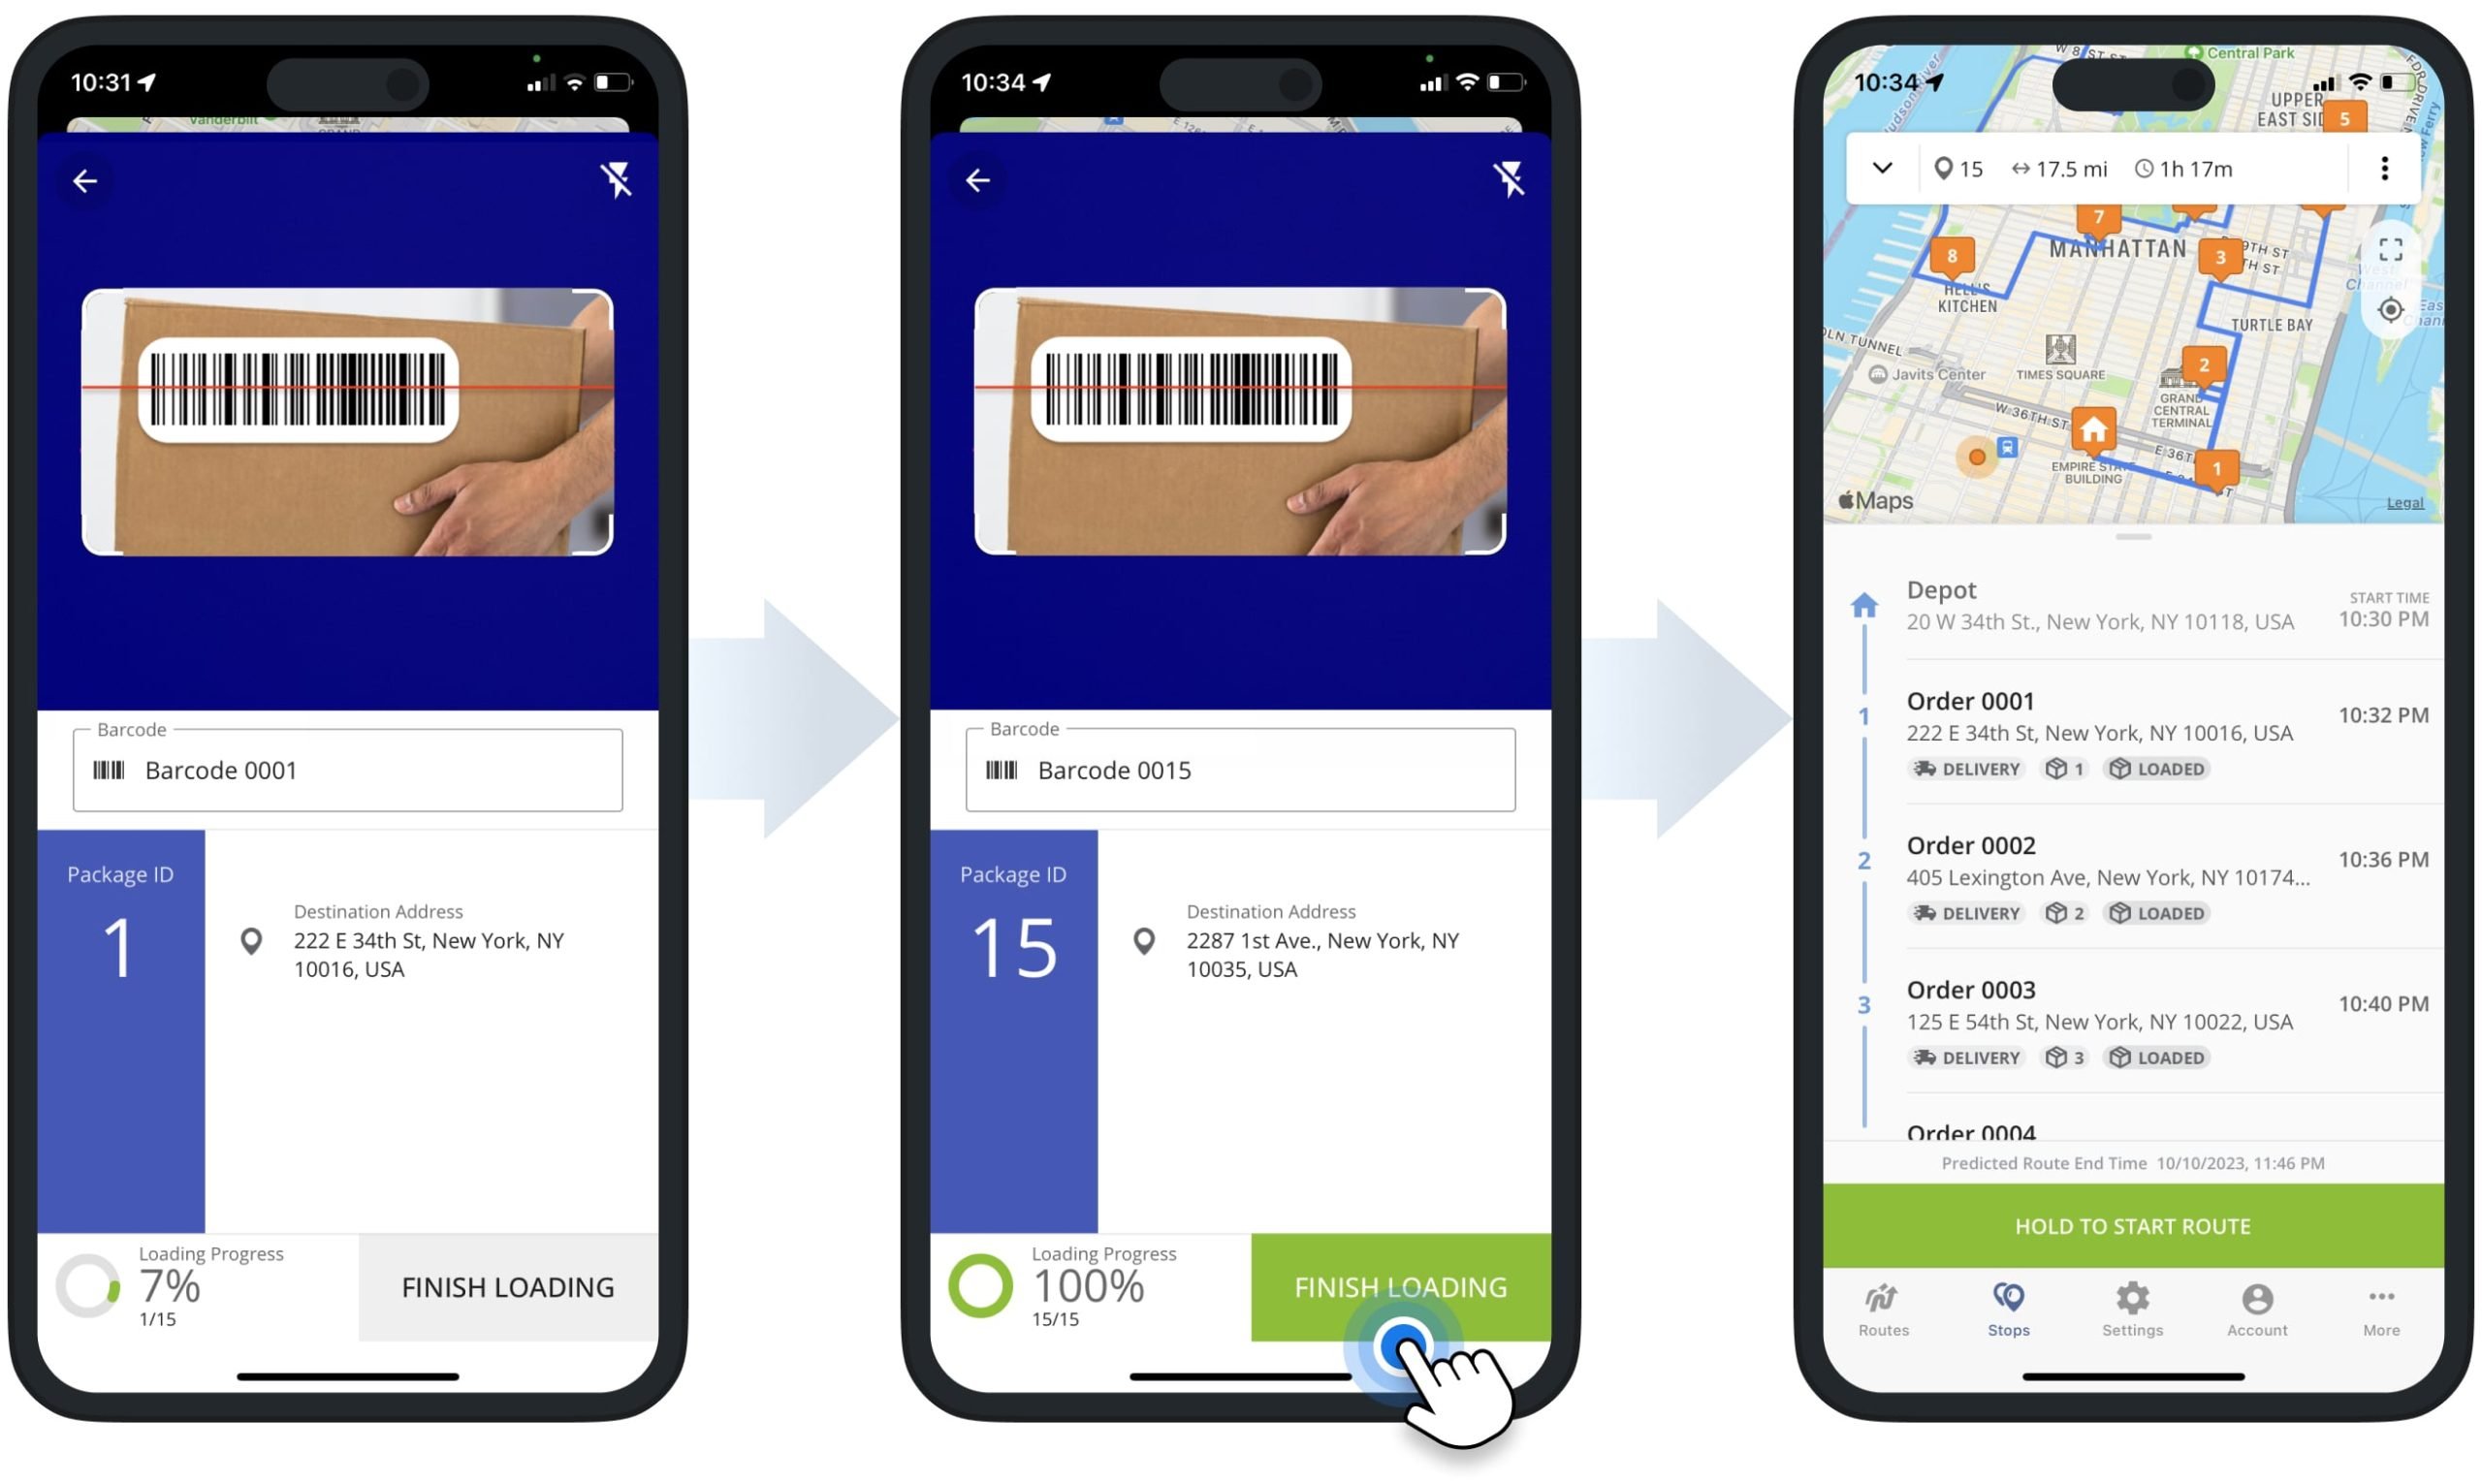 Scan all required order barcodes to finish loading orders on the route and start the route.